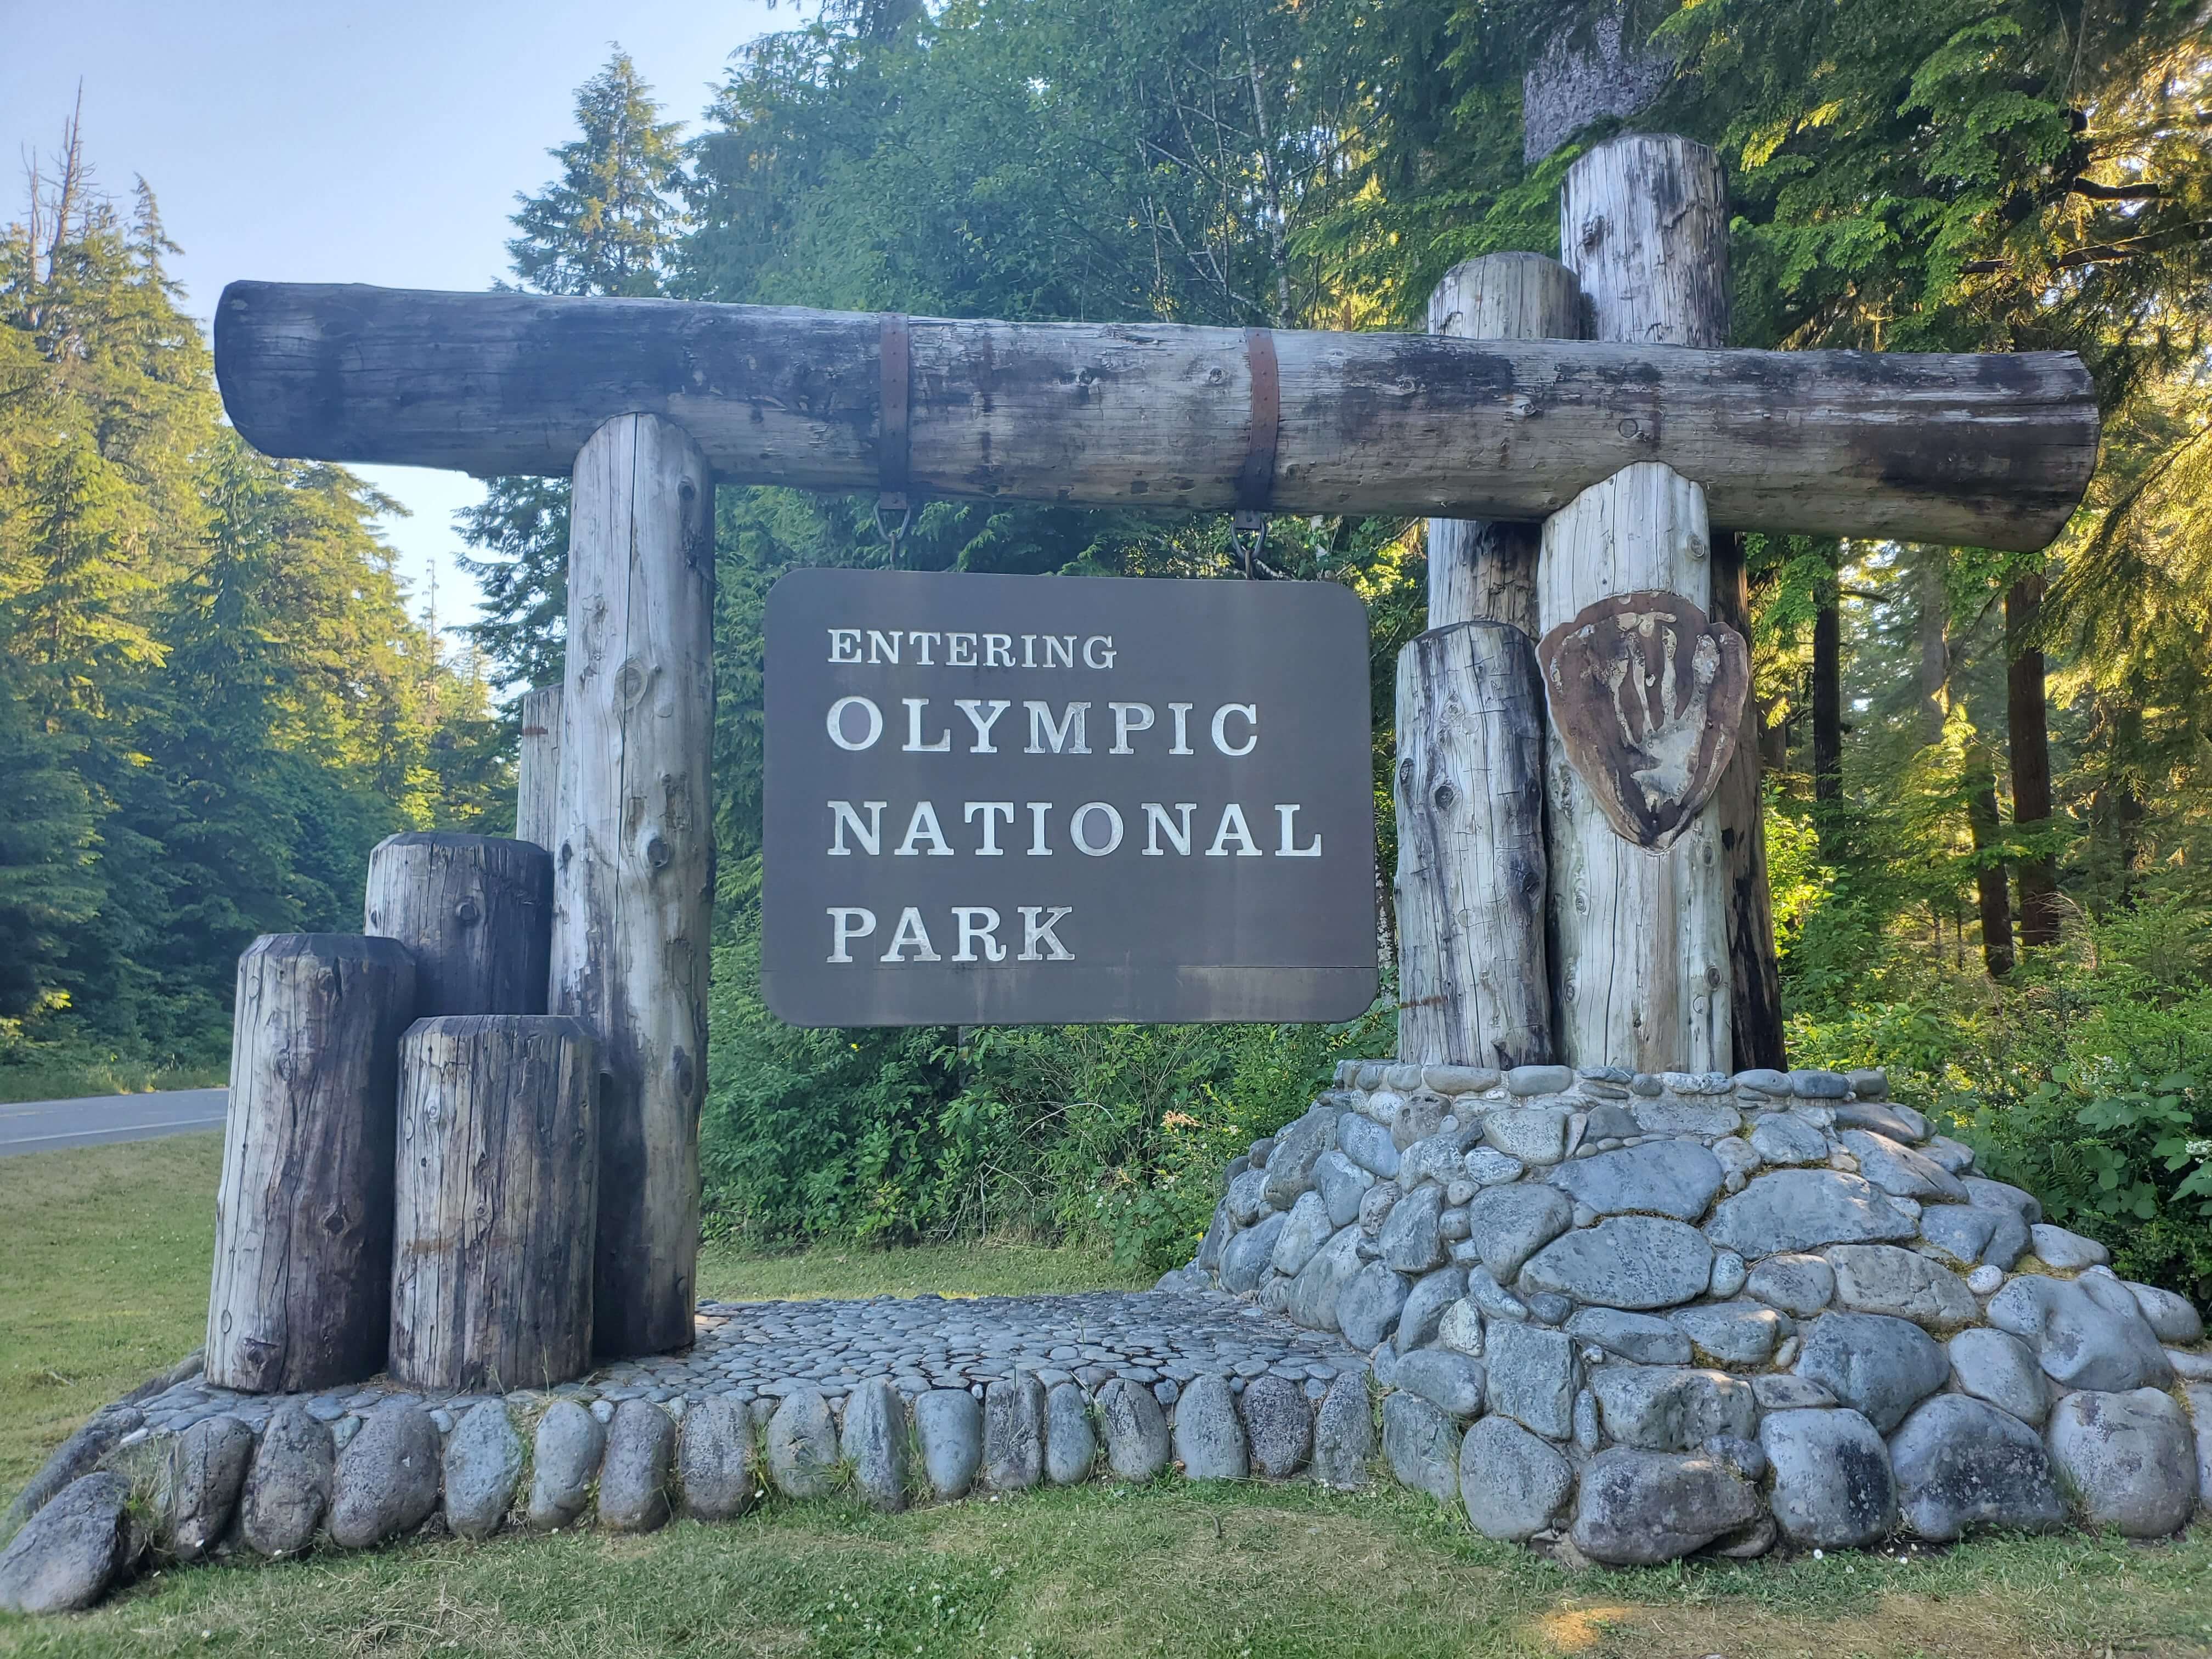 The Camper’s Complete Guide to Visiting Olympic National Park